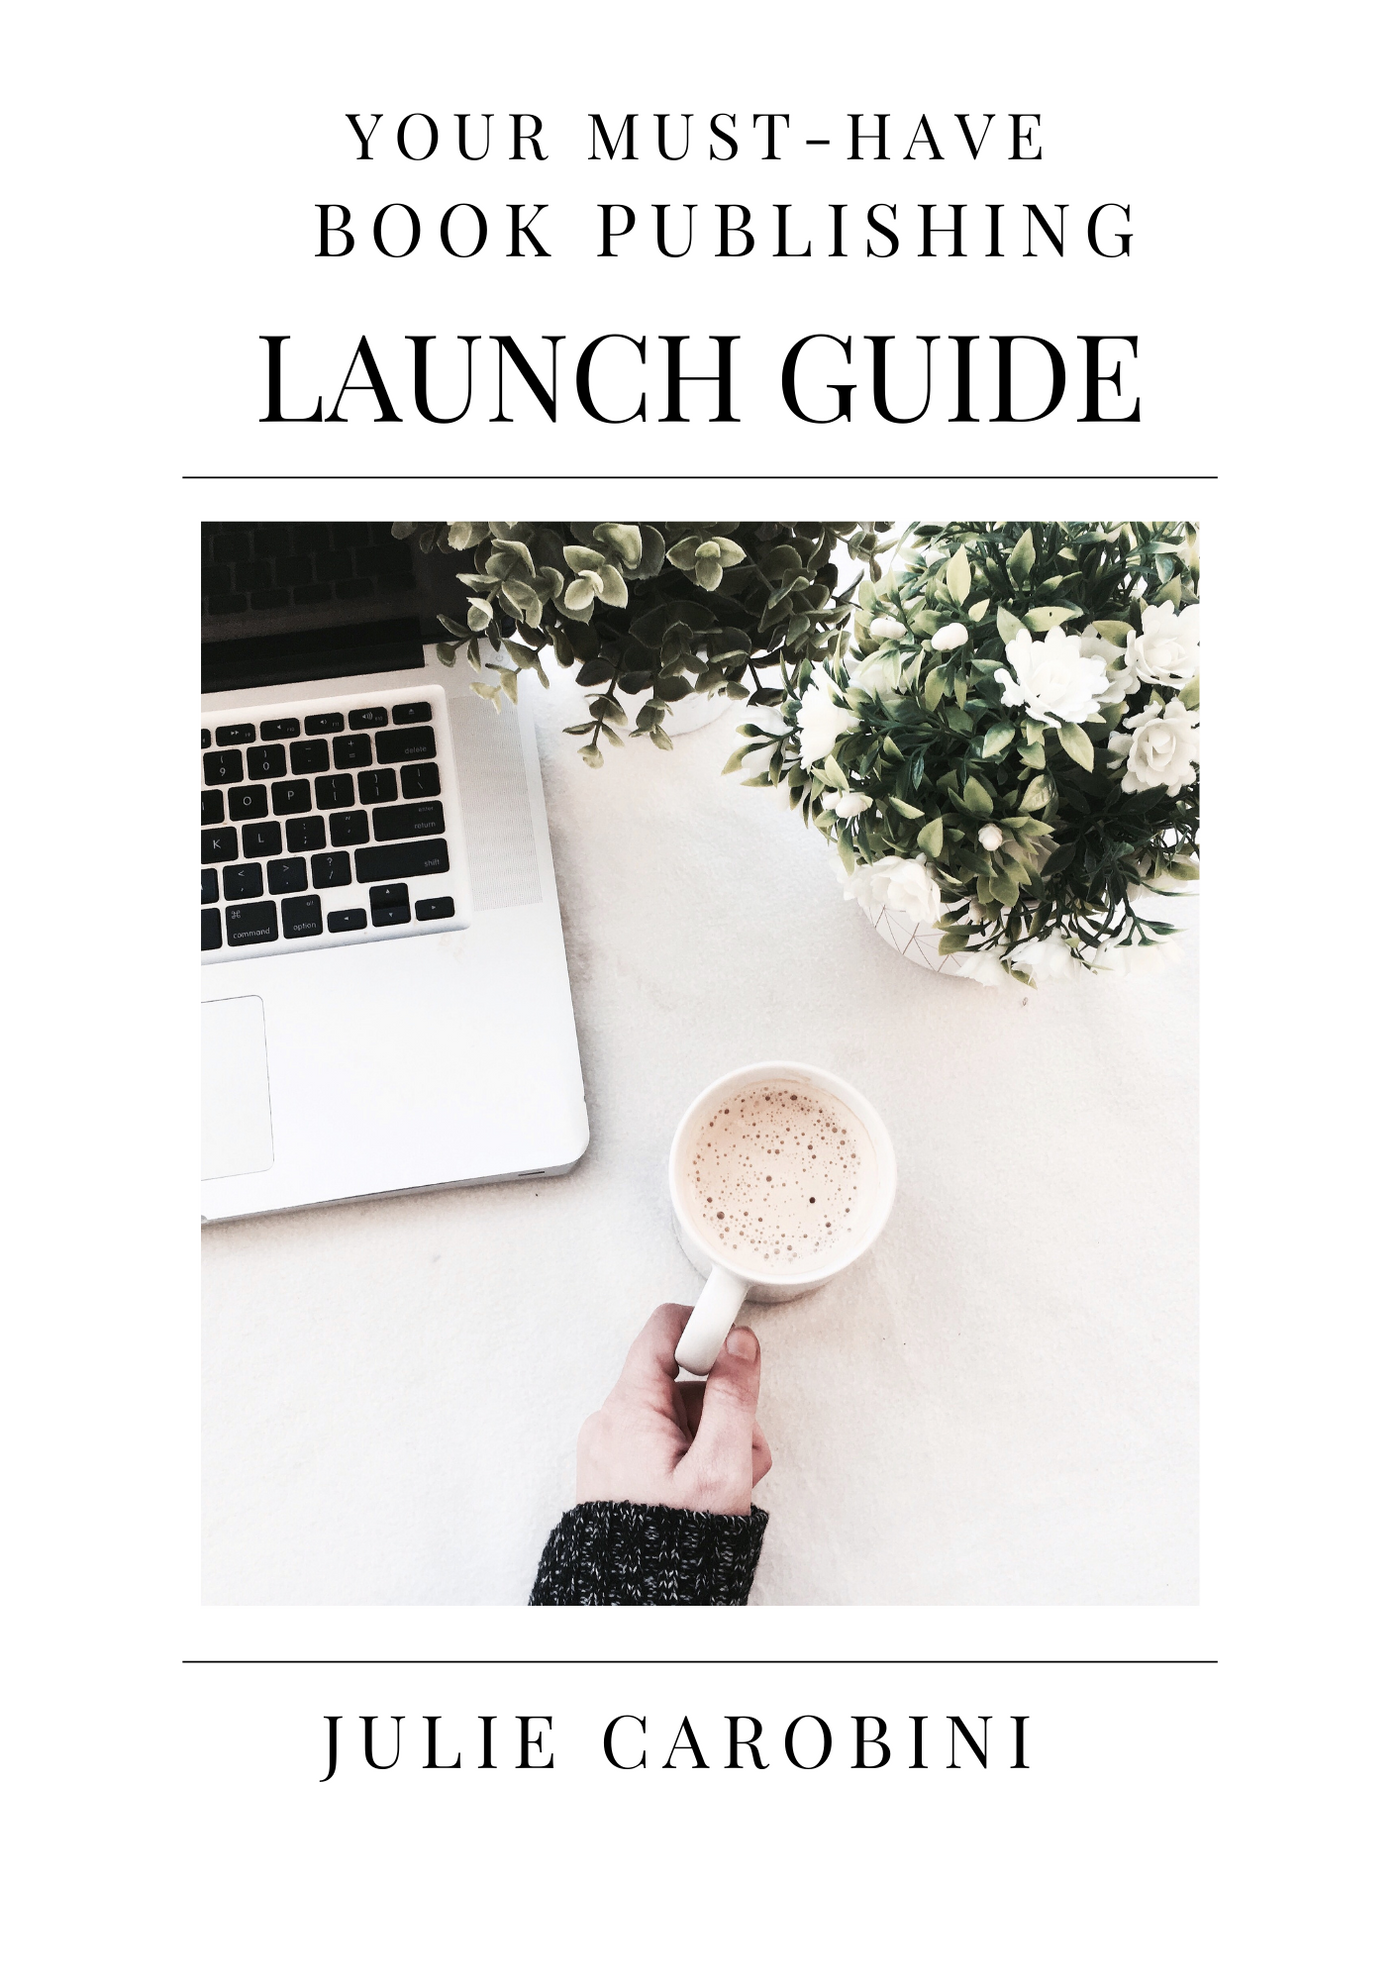 Your Must-Have Book Publishing Launch Guide